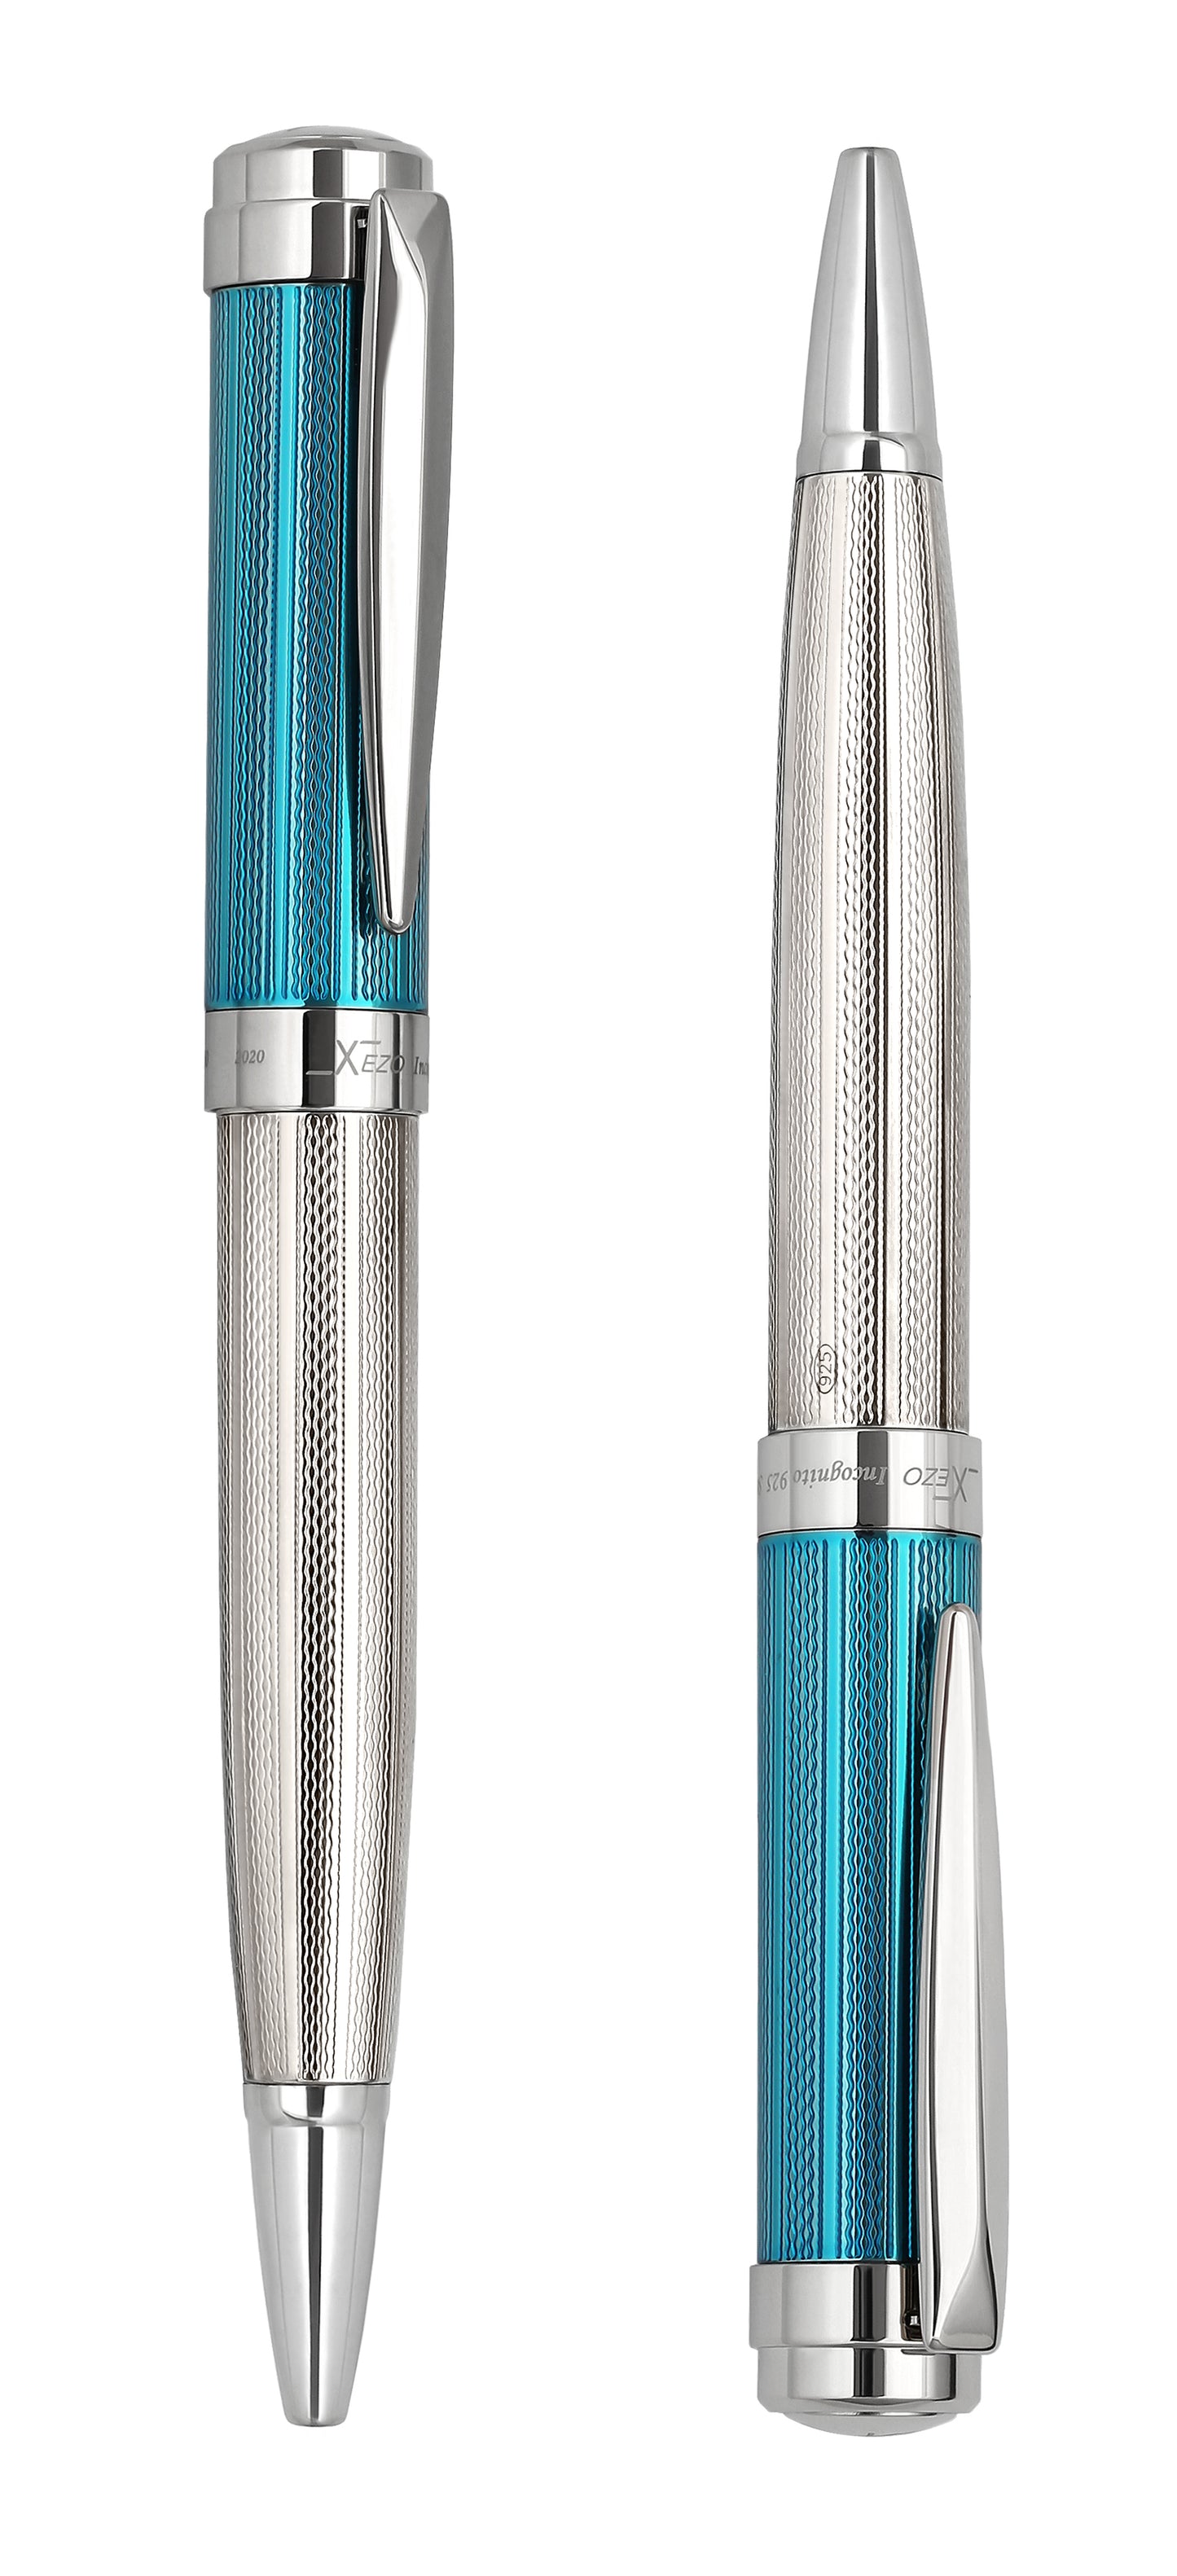 Xezo - Angled view of the front of two Incognito 925 SS Azure B ballpoint pens